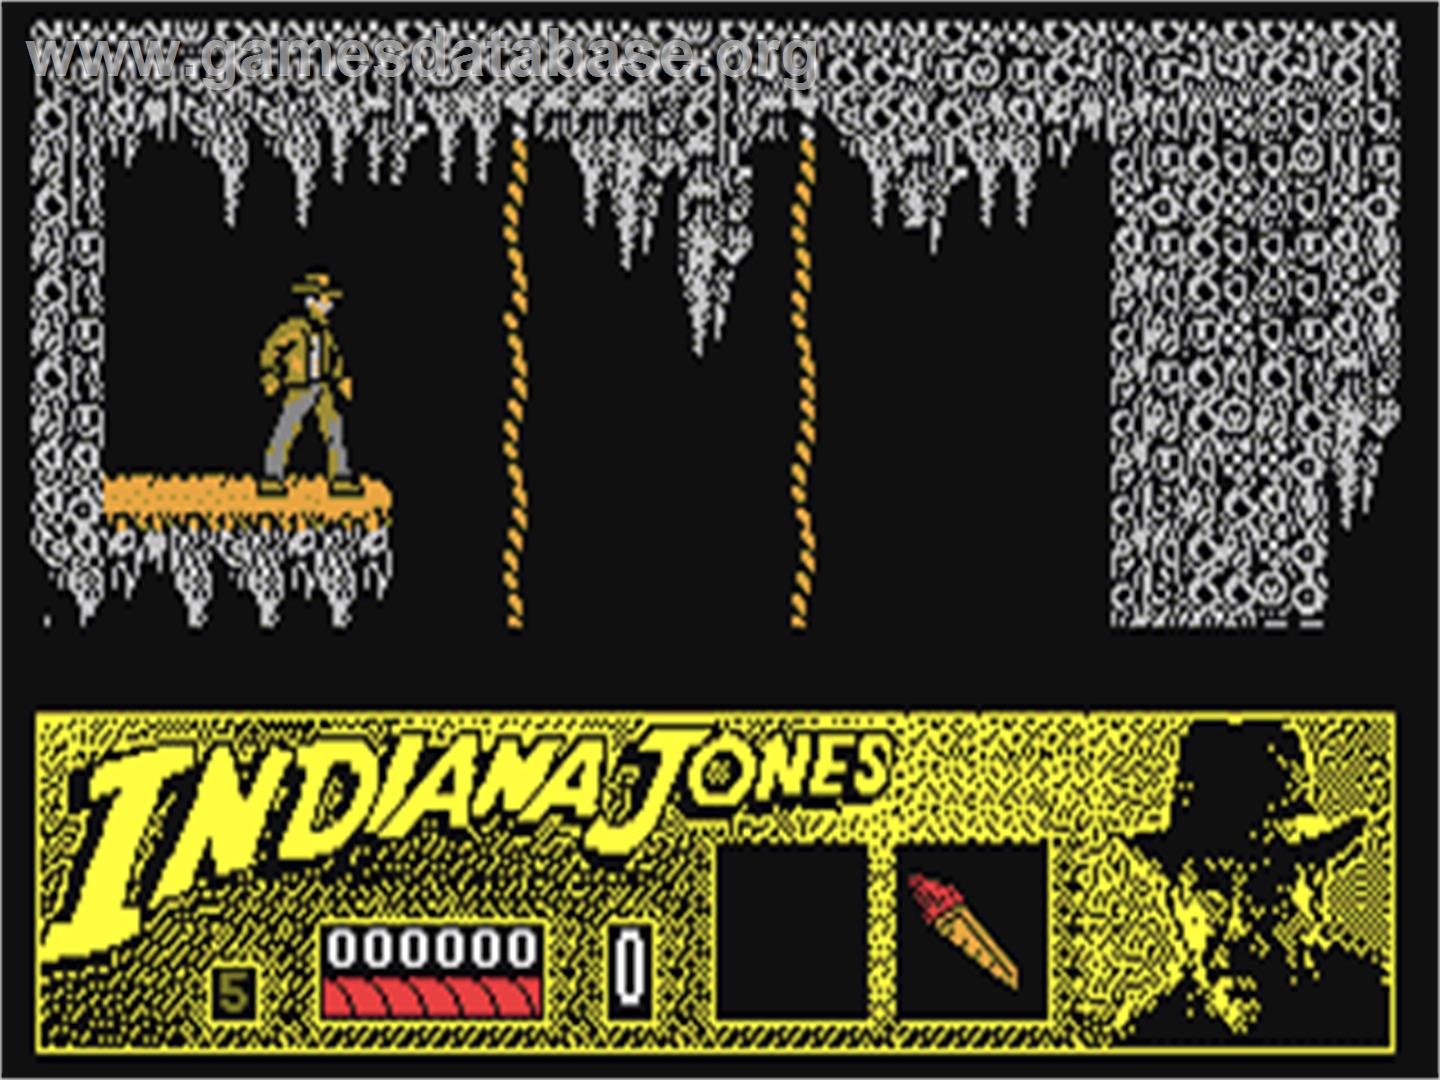 Indiana Jones and the Last Crusade: The Action Game - Commodore 64 - Artwork - In Game